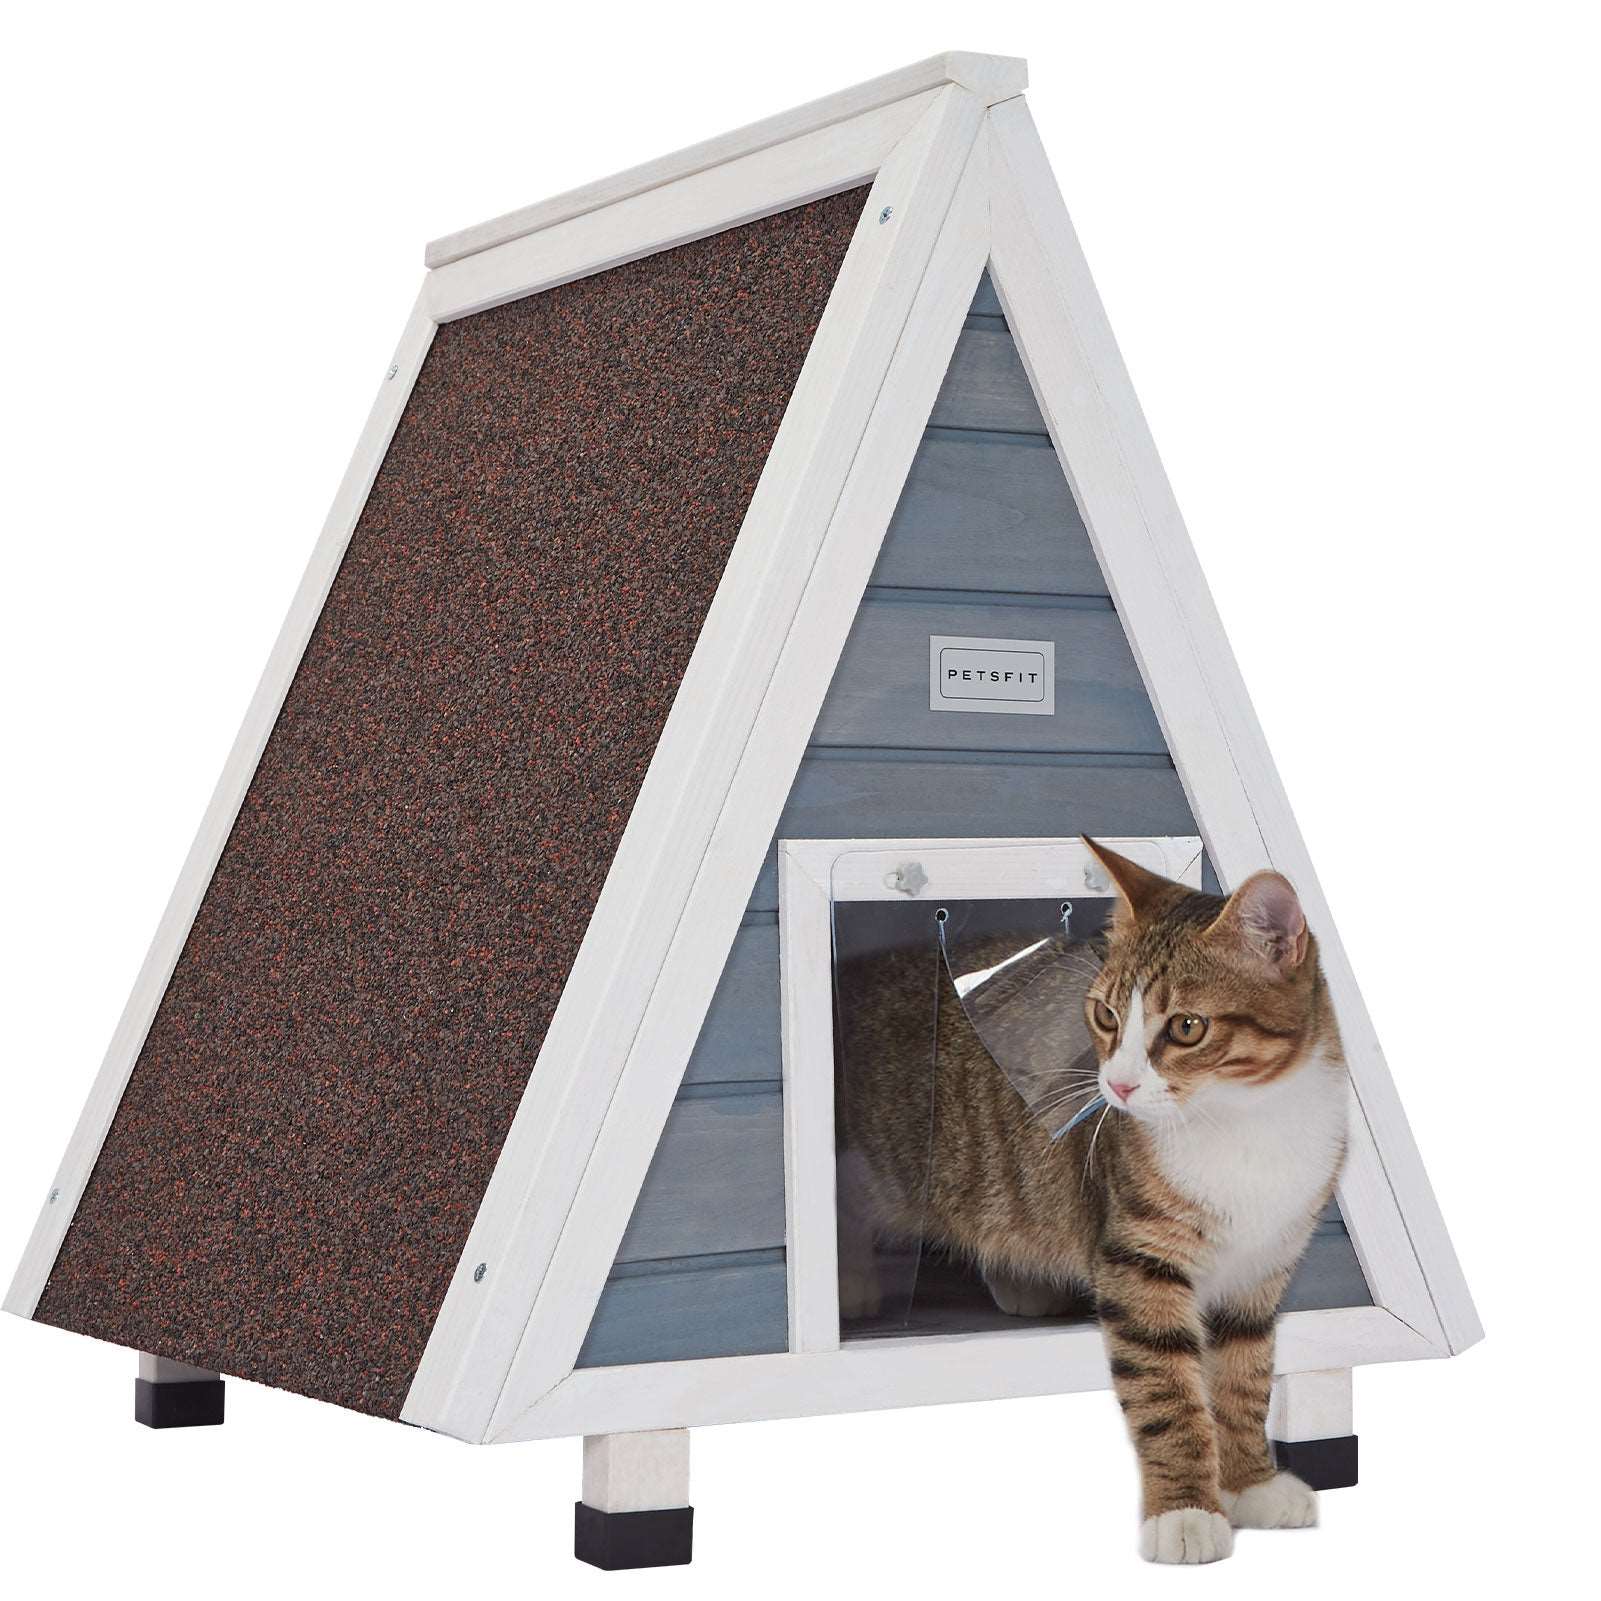 PETSFIT-Single-Story-Triangular-Cat-House-With-Foot-Stand-09